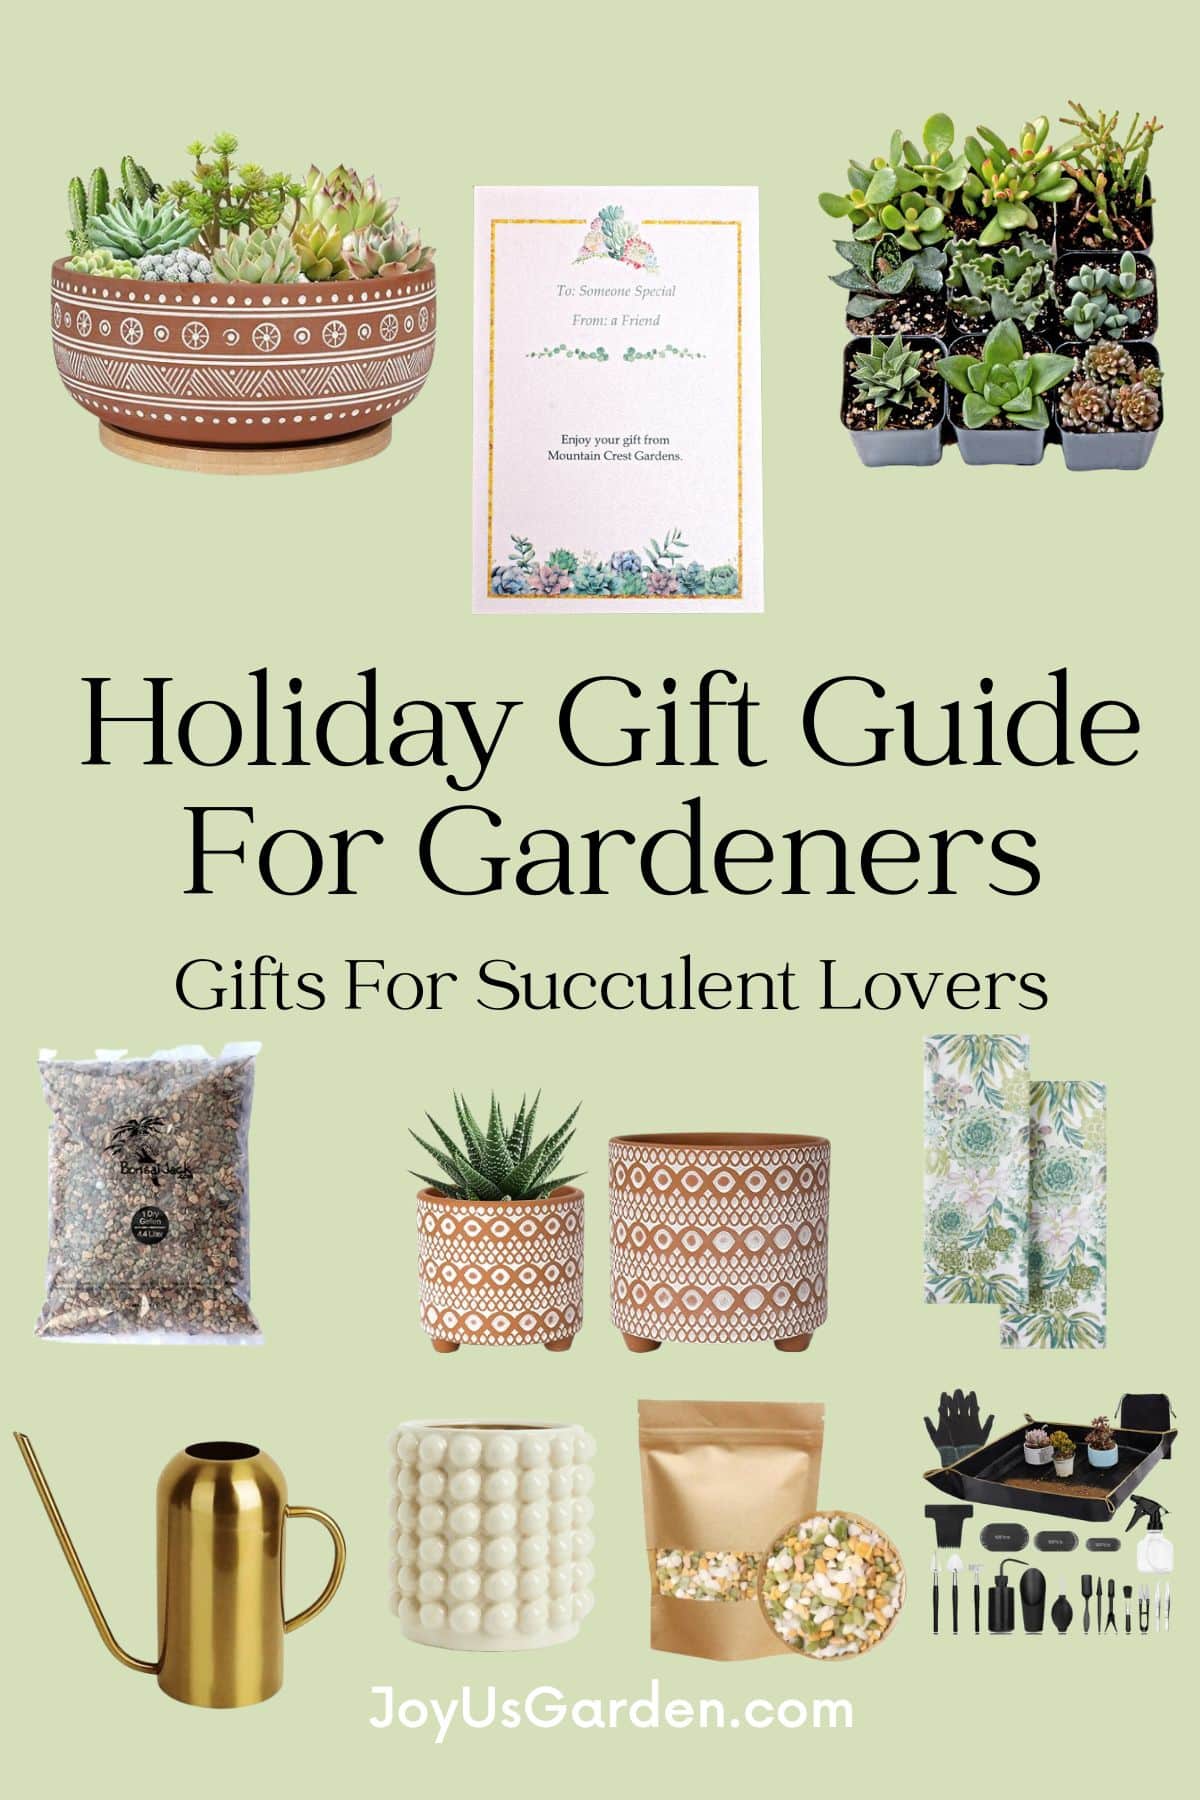 Holiday gift guide collage or products that can be bought online for succulent lovers.